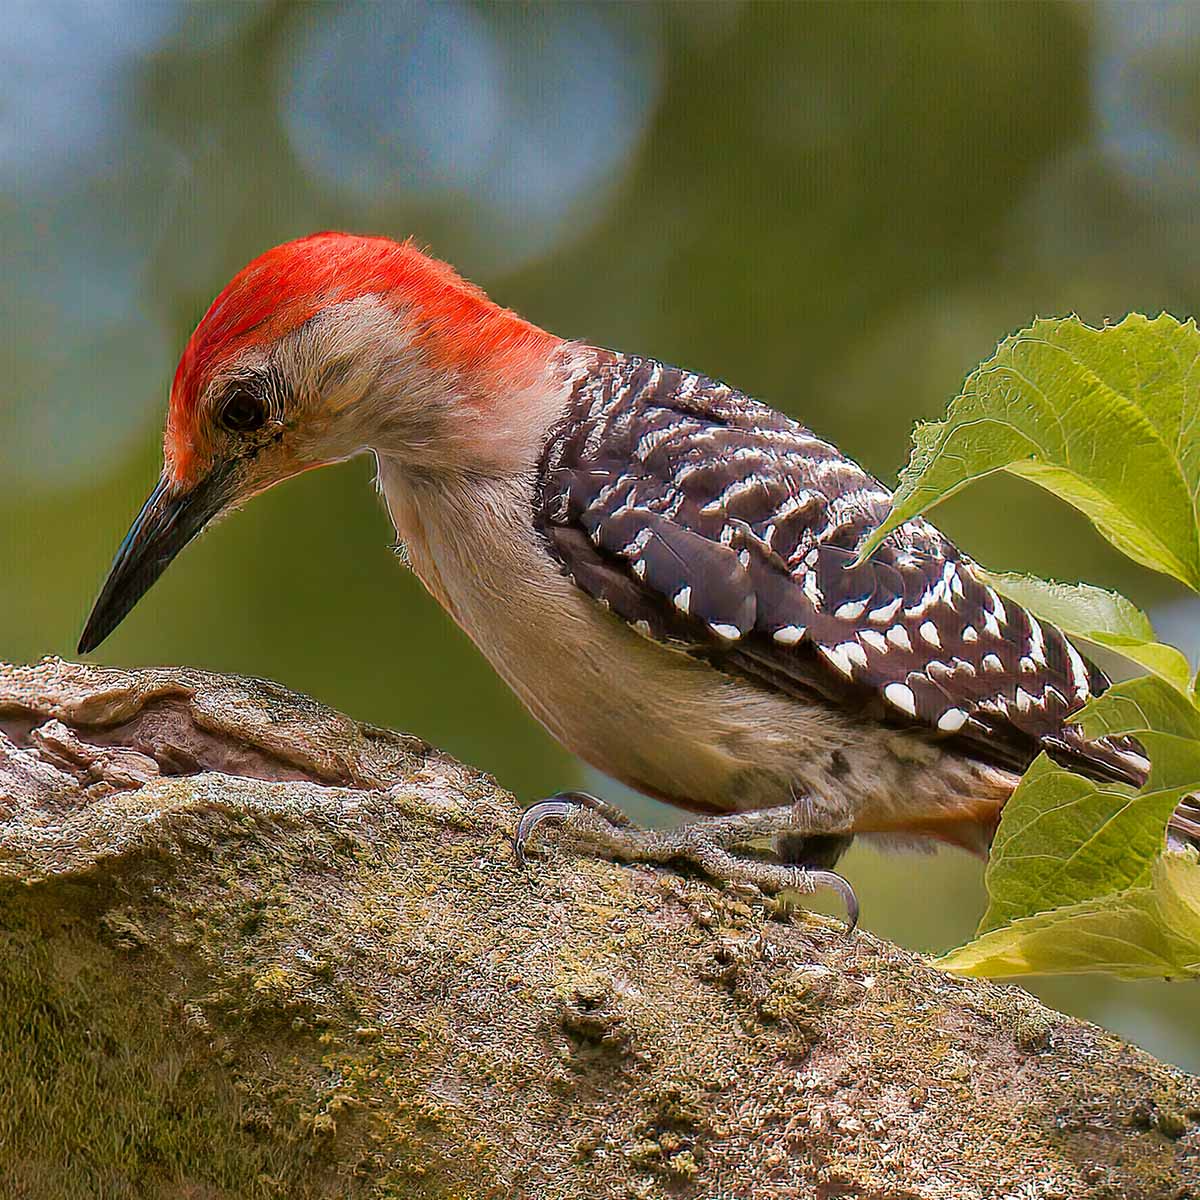 The image depicts a male red-bellied woodpecker clinging to the side of a tree trunk, hard at work as it's about to run it's beak into the pine. The woodpecker has a distinctive red cap that extends from the top of its head down the back of its neck. Its back and wings are a mix of black and peppered-in white feathers, creating a striking, zebra-like pattern. The bird's belly has a faint reddish hue, giving it its name. The woodpecker's strong, chisel-like beak and sharp claws allow it to expertly navigate the tree bark in search of insects and other food. The natural, wooded setting provides the perfect habitat for this adaptable and common North American woodpecker species.